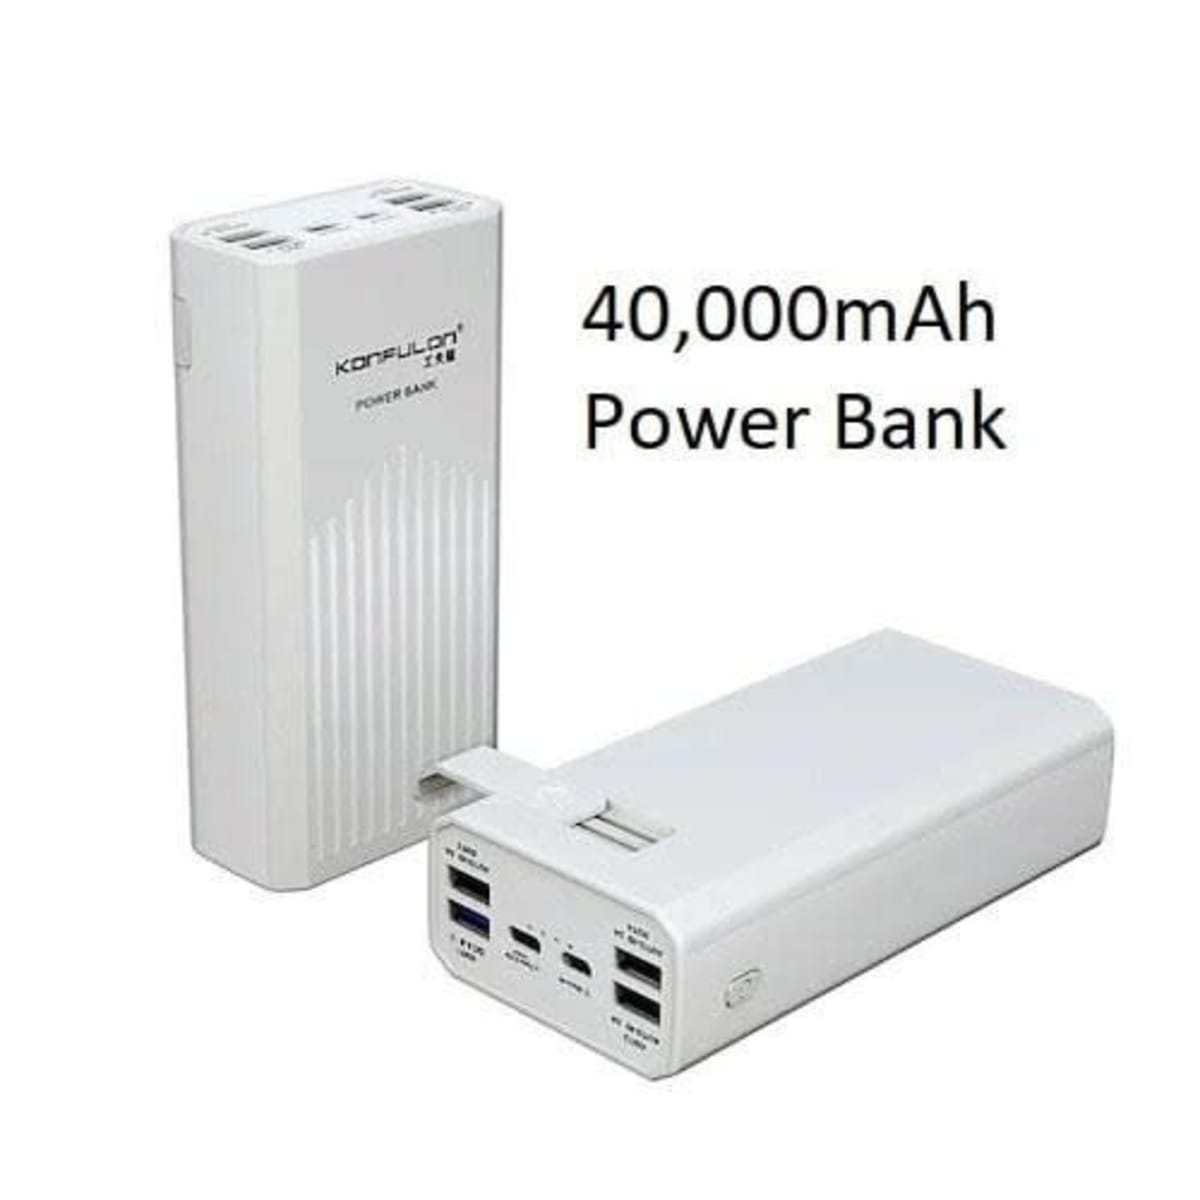 Konfulon 40,000mah Power Bank For Phones And Laptops With Multiple